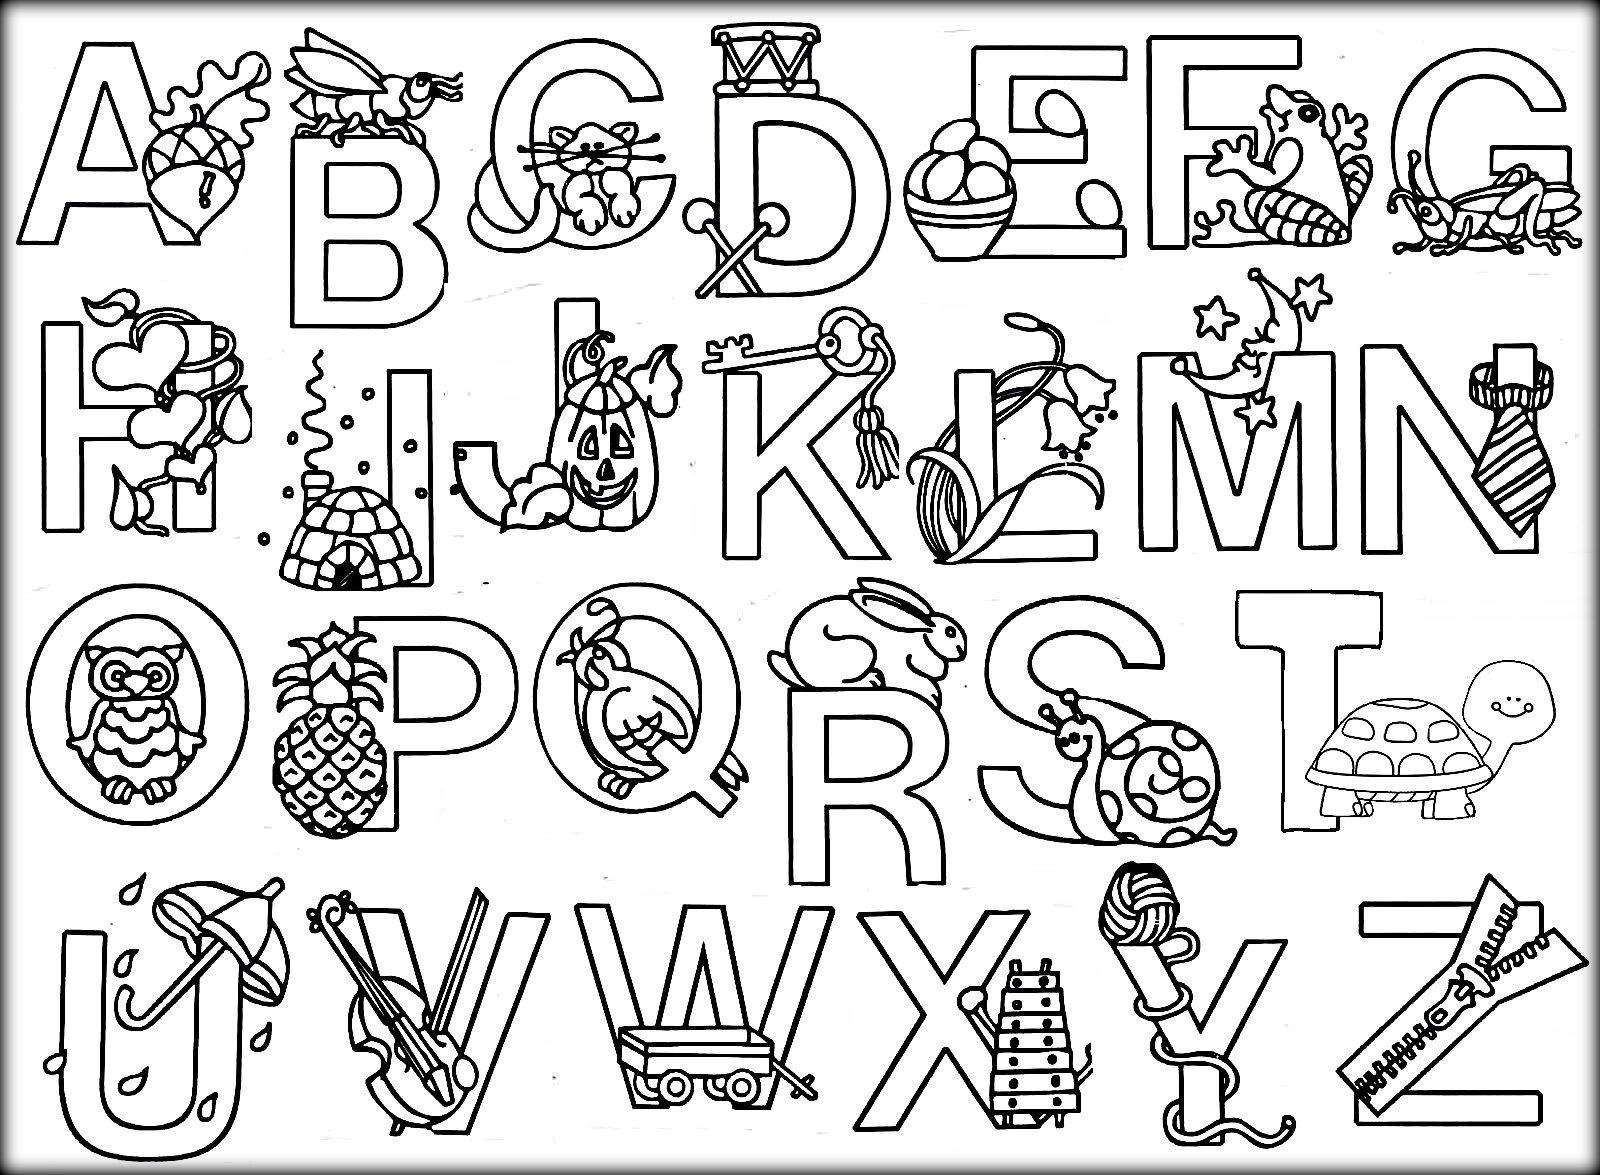 Coloring pages coloring bookt pages printable free for kids letter of the children color letters learning and